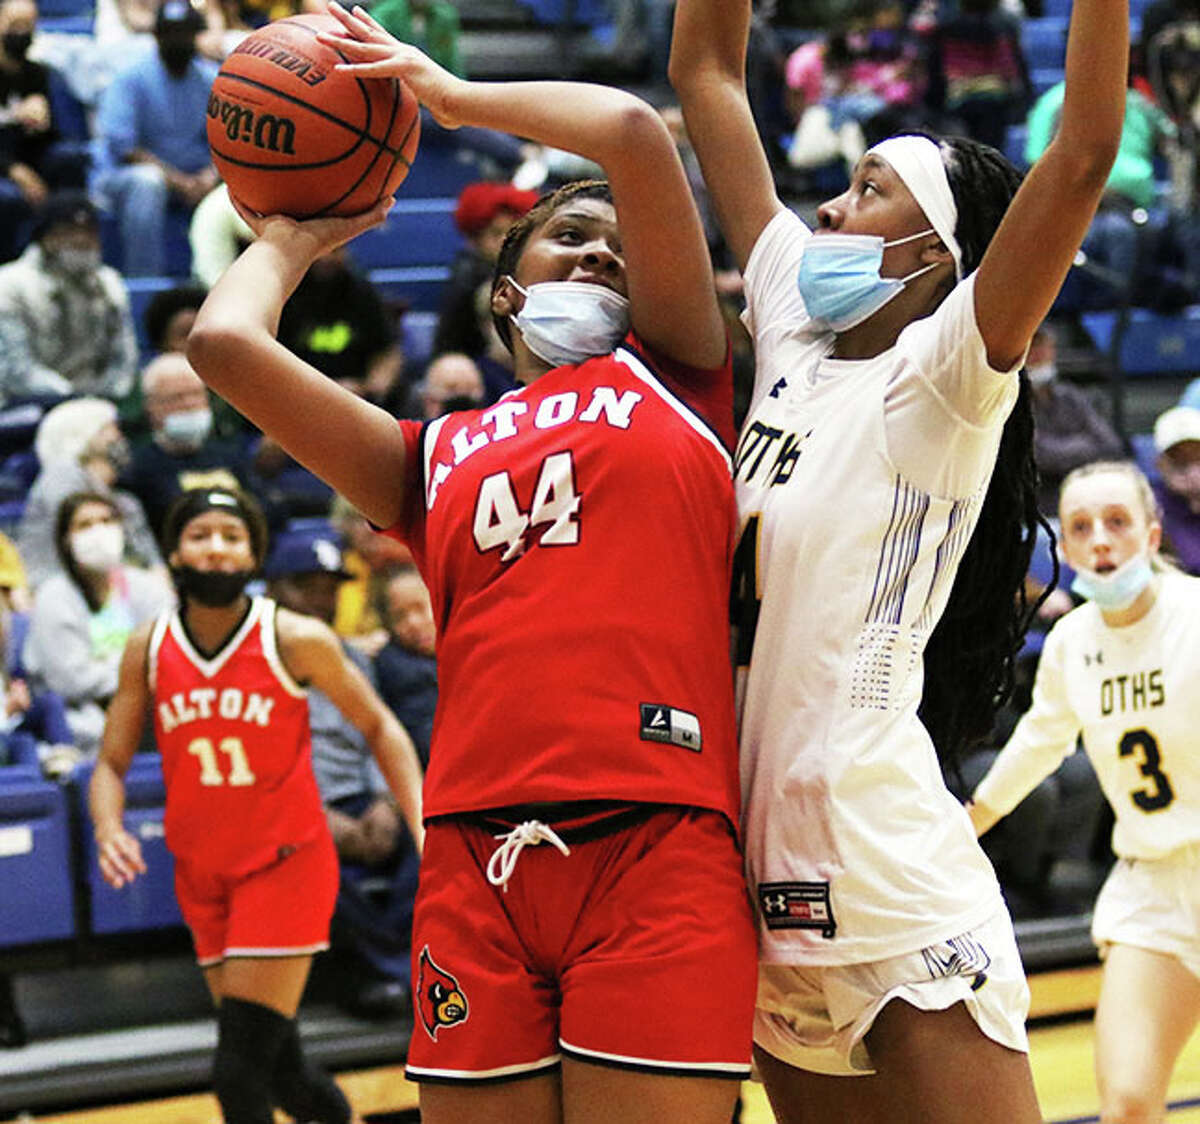 Alton's Jarius Powers (44) puts up a shot against O'Fallon's D'Myjah Bolds on Thursday at Panther Dome in O'Fallon.